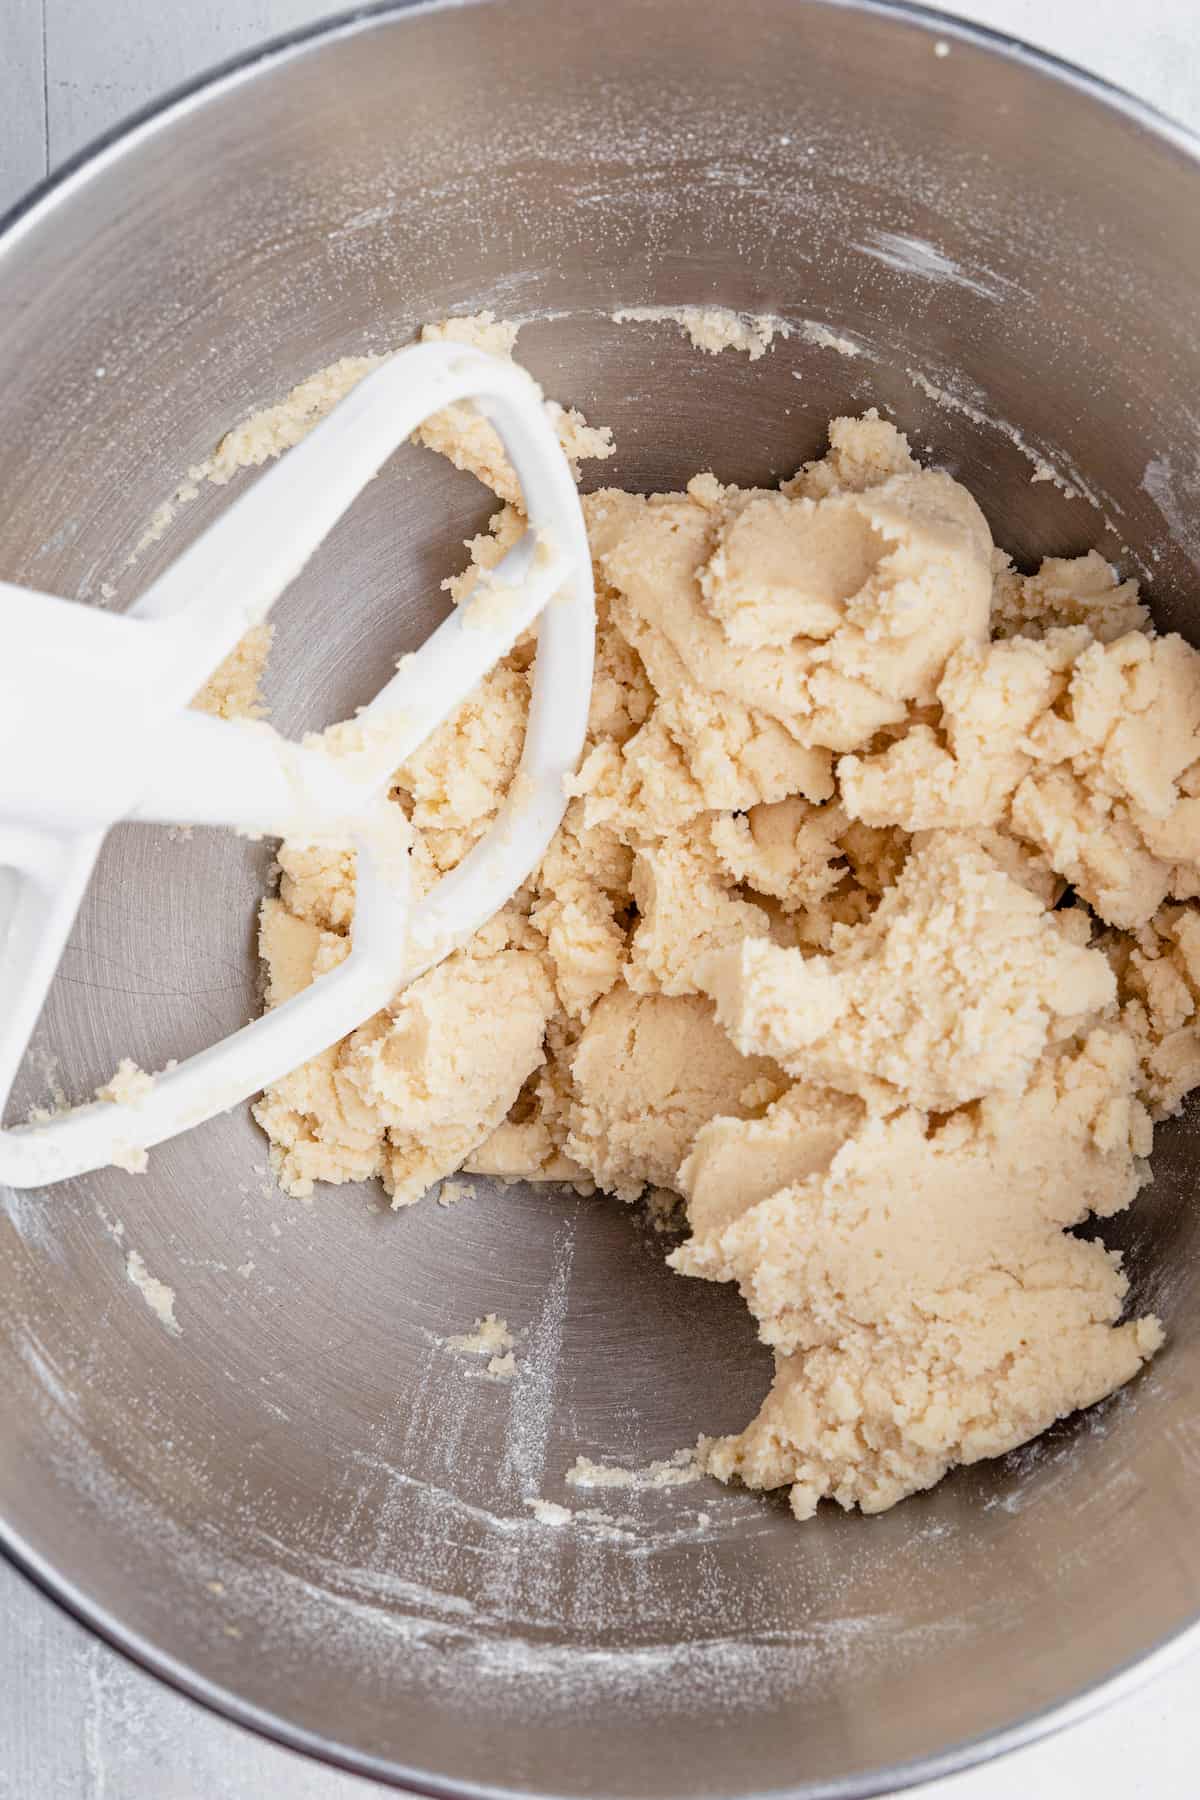 Sugar Cookie Dough Inside of a Metal Mixing Bowl on a Countertop